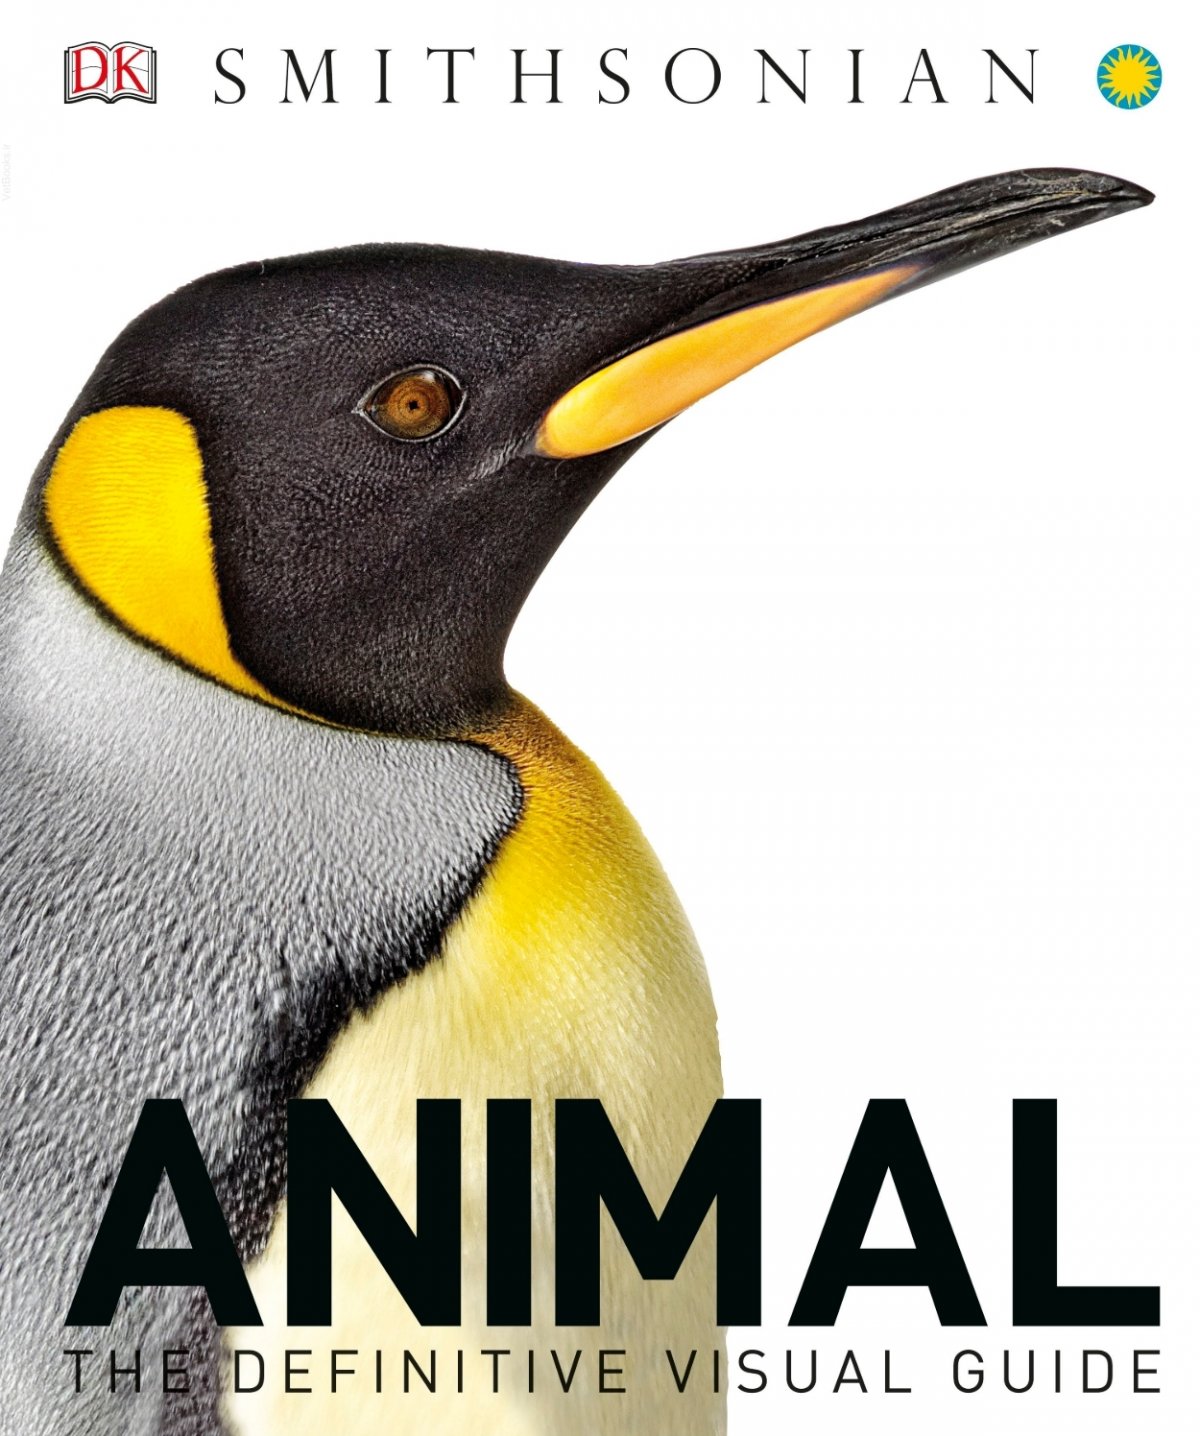 Animal. The Definitive Visual Guide